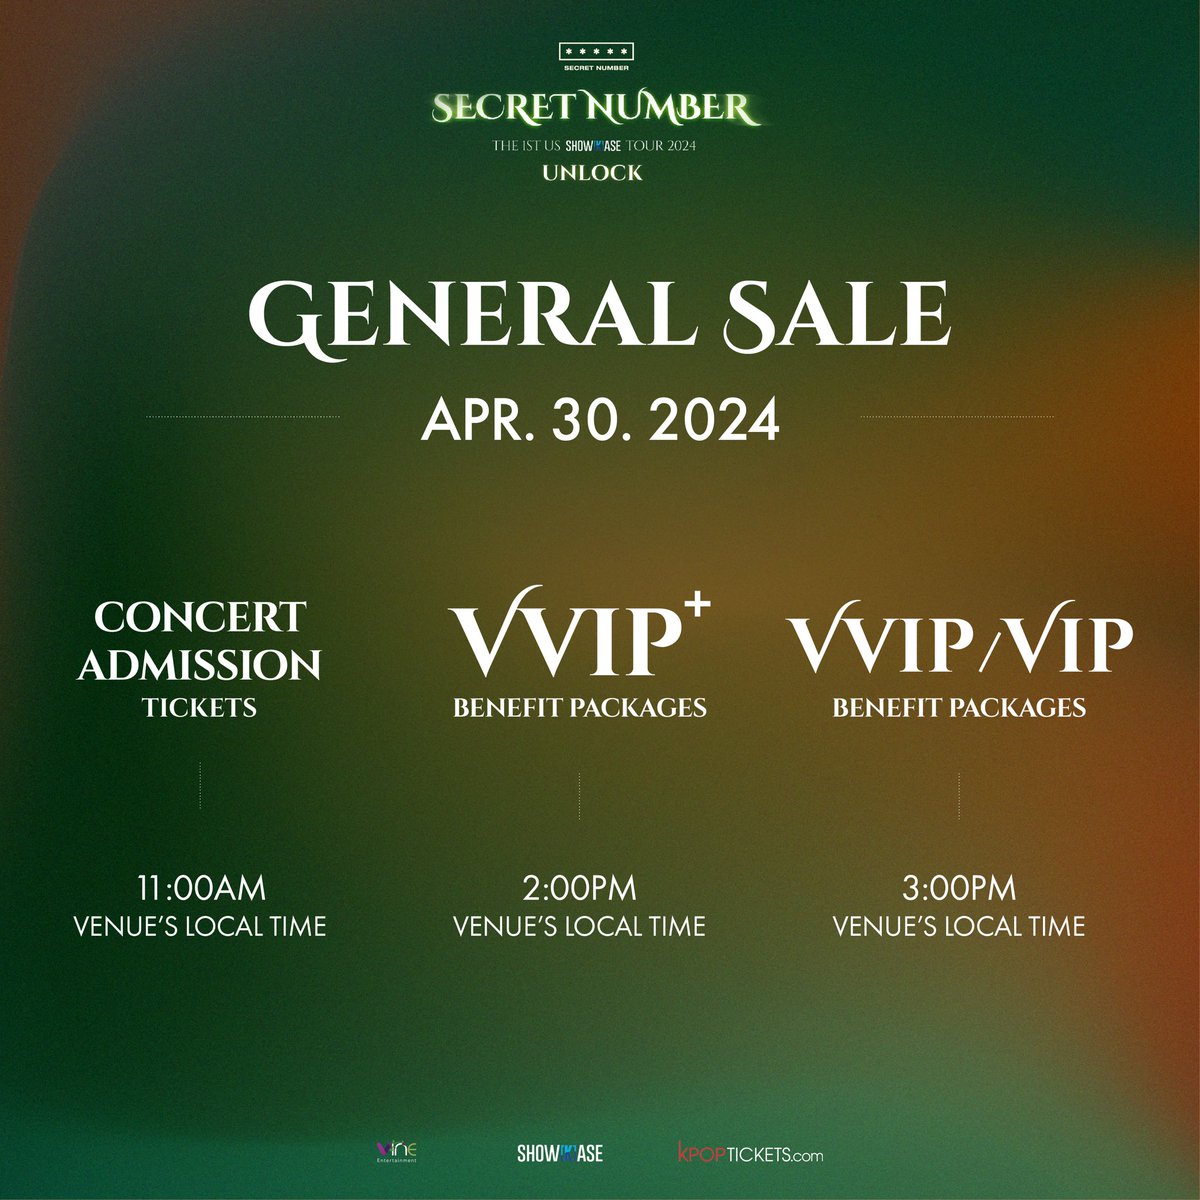 #LOCKEY General Sale opens SOON!! Here's a reminder of the schedule! 🎟️ Concert Admission: 11:00AM 🌟 VVIP+: 2:00PM ✨ VVIP / VIP: 3:00PM ⚠️ LA and Seattle are still set to go on sale May 1st for pledgers and May 3rd for everyone!⚠️ #KPOP_ShowKase #SECRETNUMBER